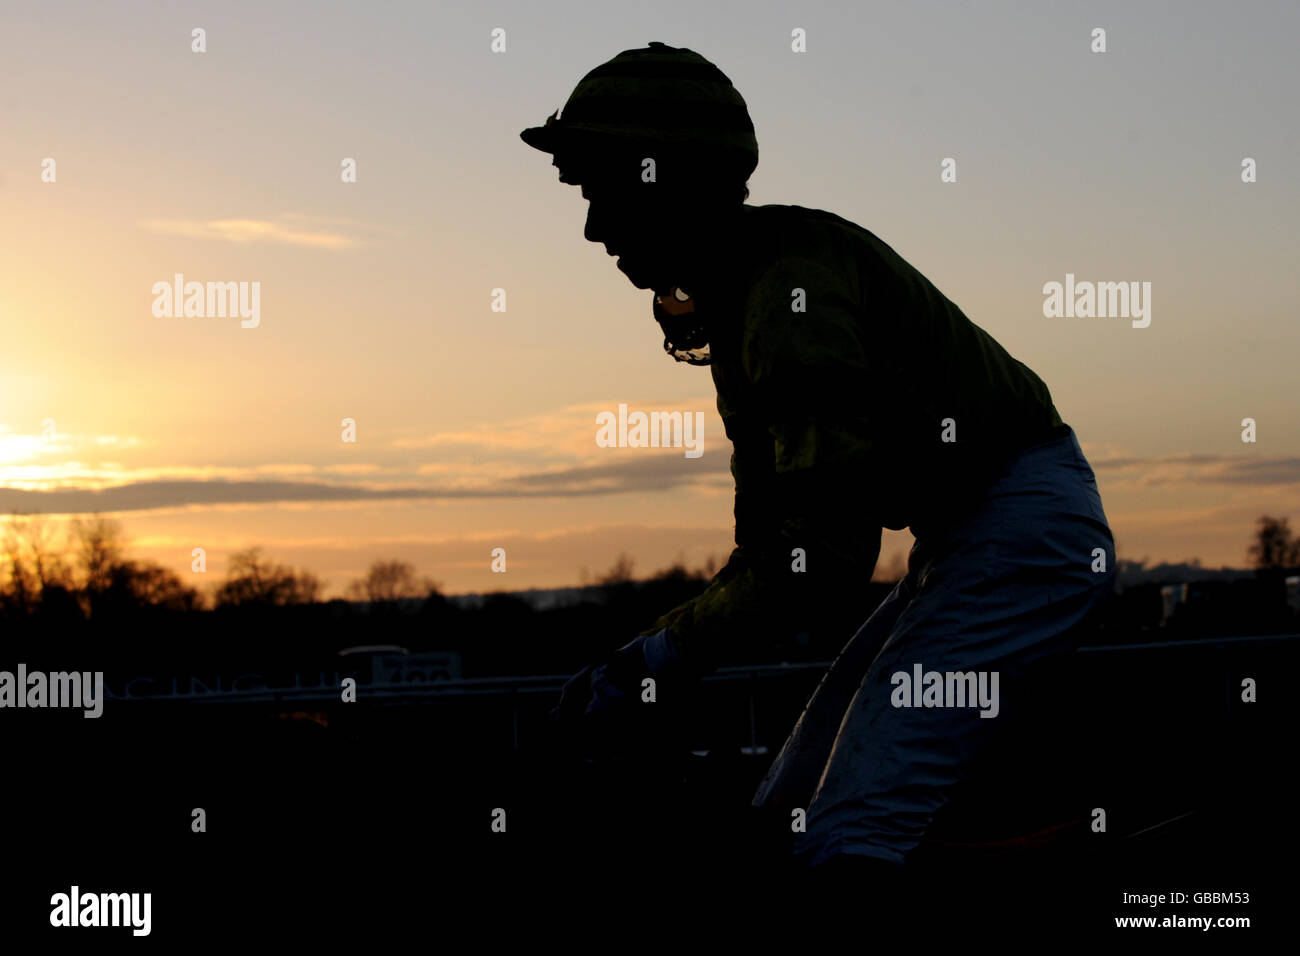 A general view of Horse racing as the rider is seen against the setting sun at Huntingdon Racecourse Stock Photo